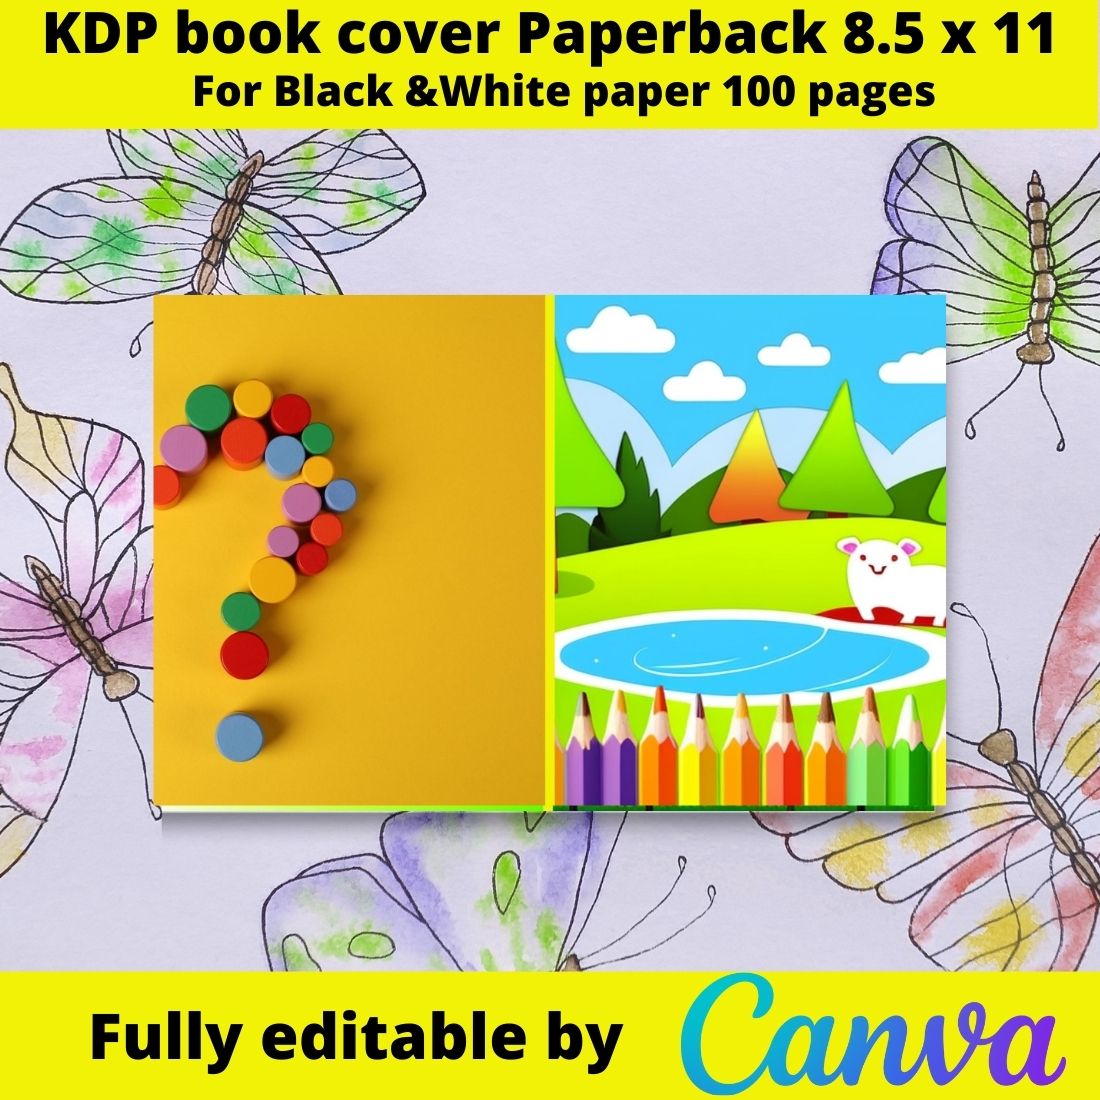 Our KDP book covers will make your child's story unforgettable preview image.